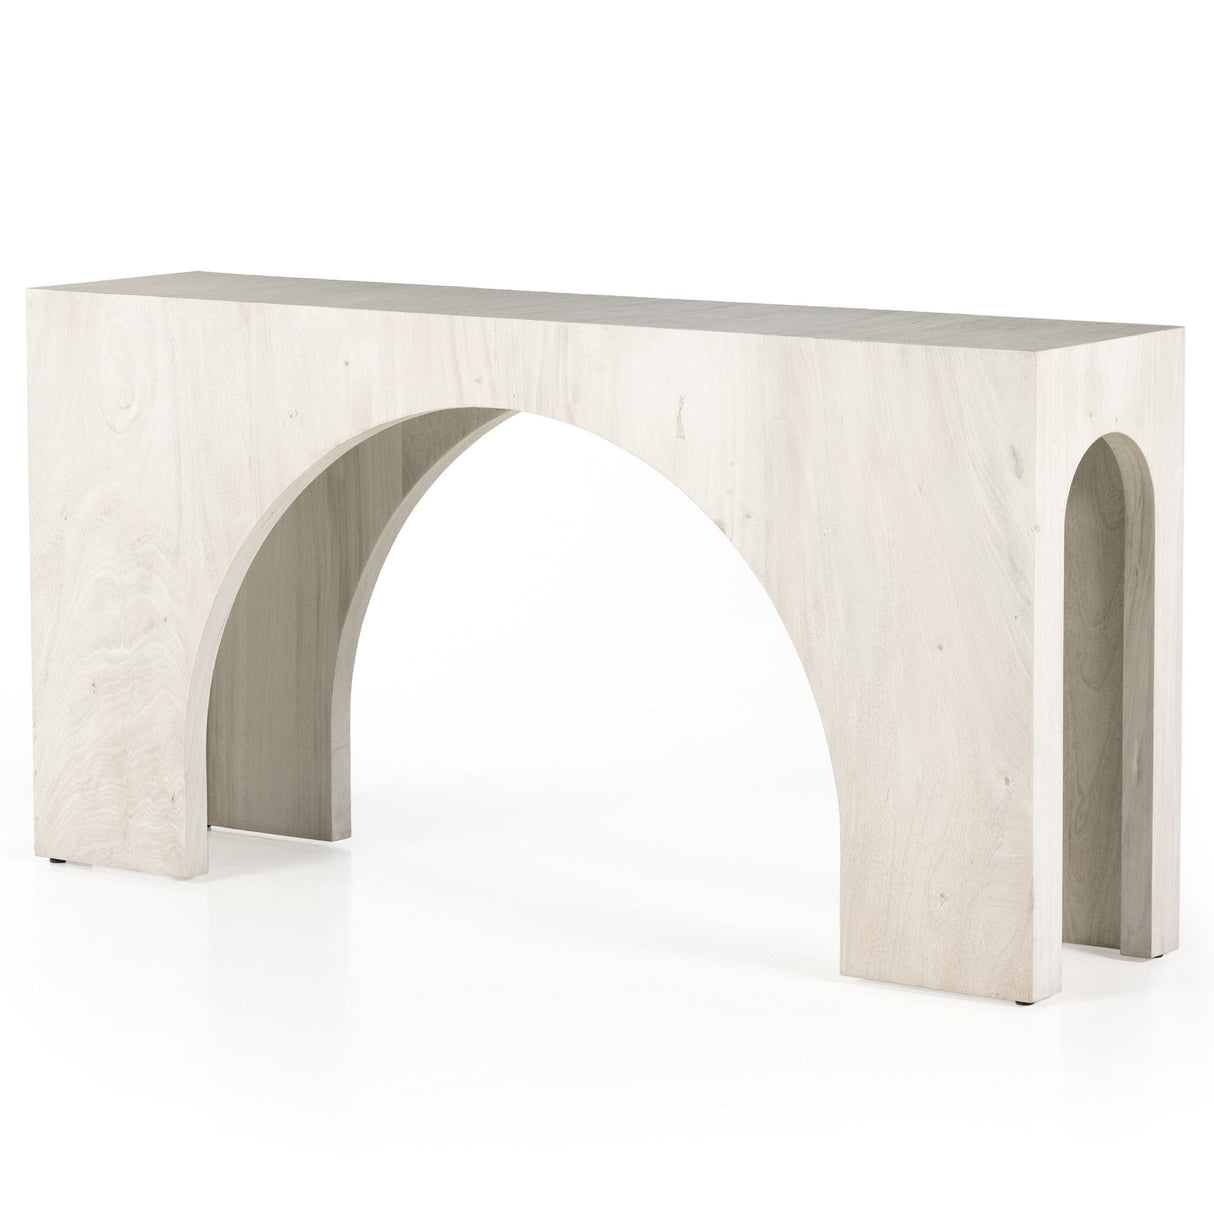 Four Hands Fausto Console Table Furniture four-hands-226801-001 801542664534